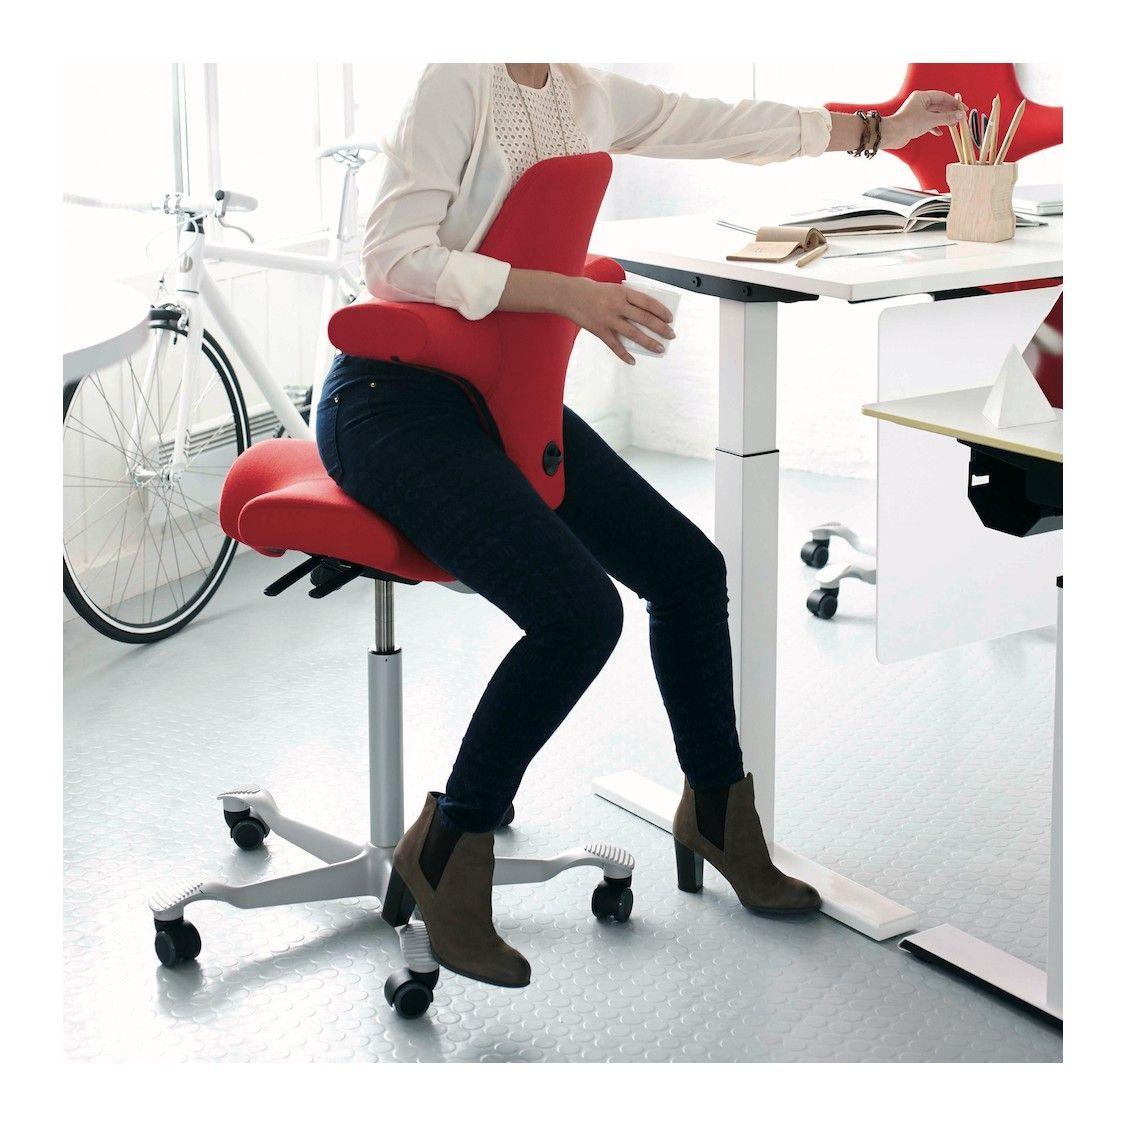 Red Backwards C Logo - Fully's Tic-Toc And HAG Capisco Chairs Inspire Movement And ...